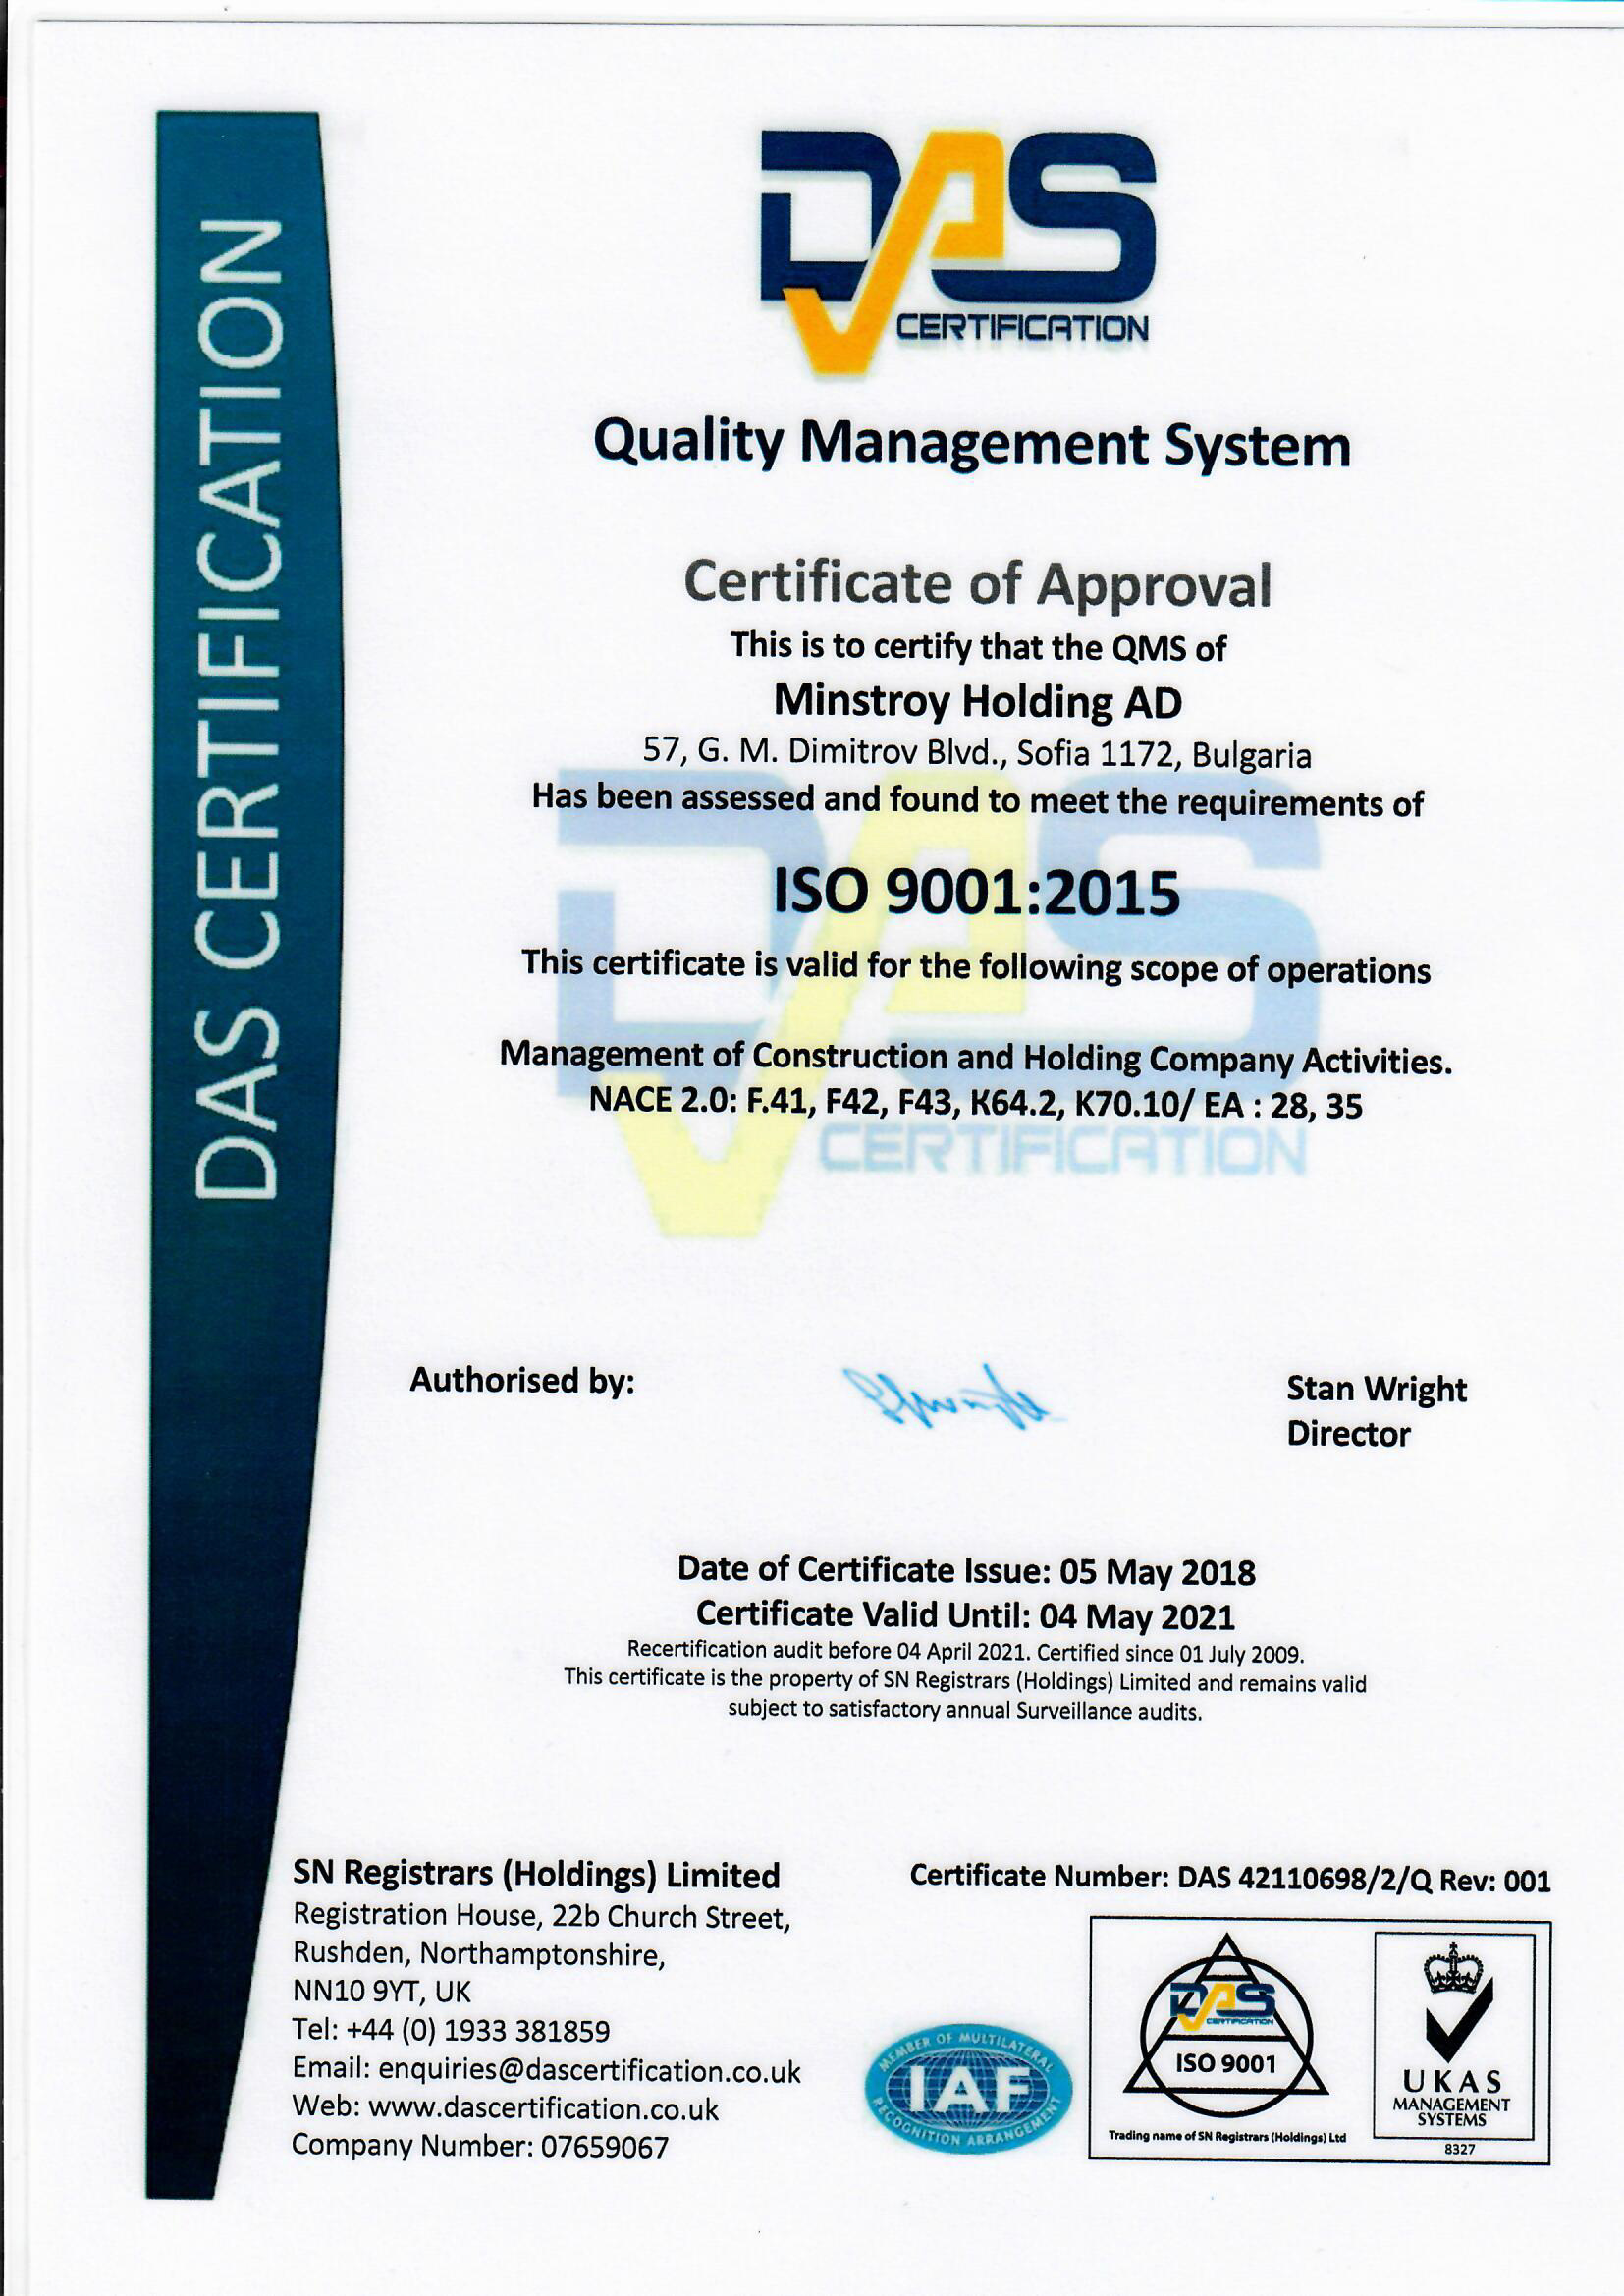 Quality Management, according to ISO 9001:2015;